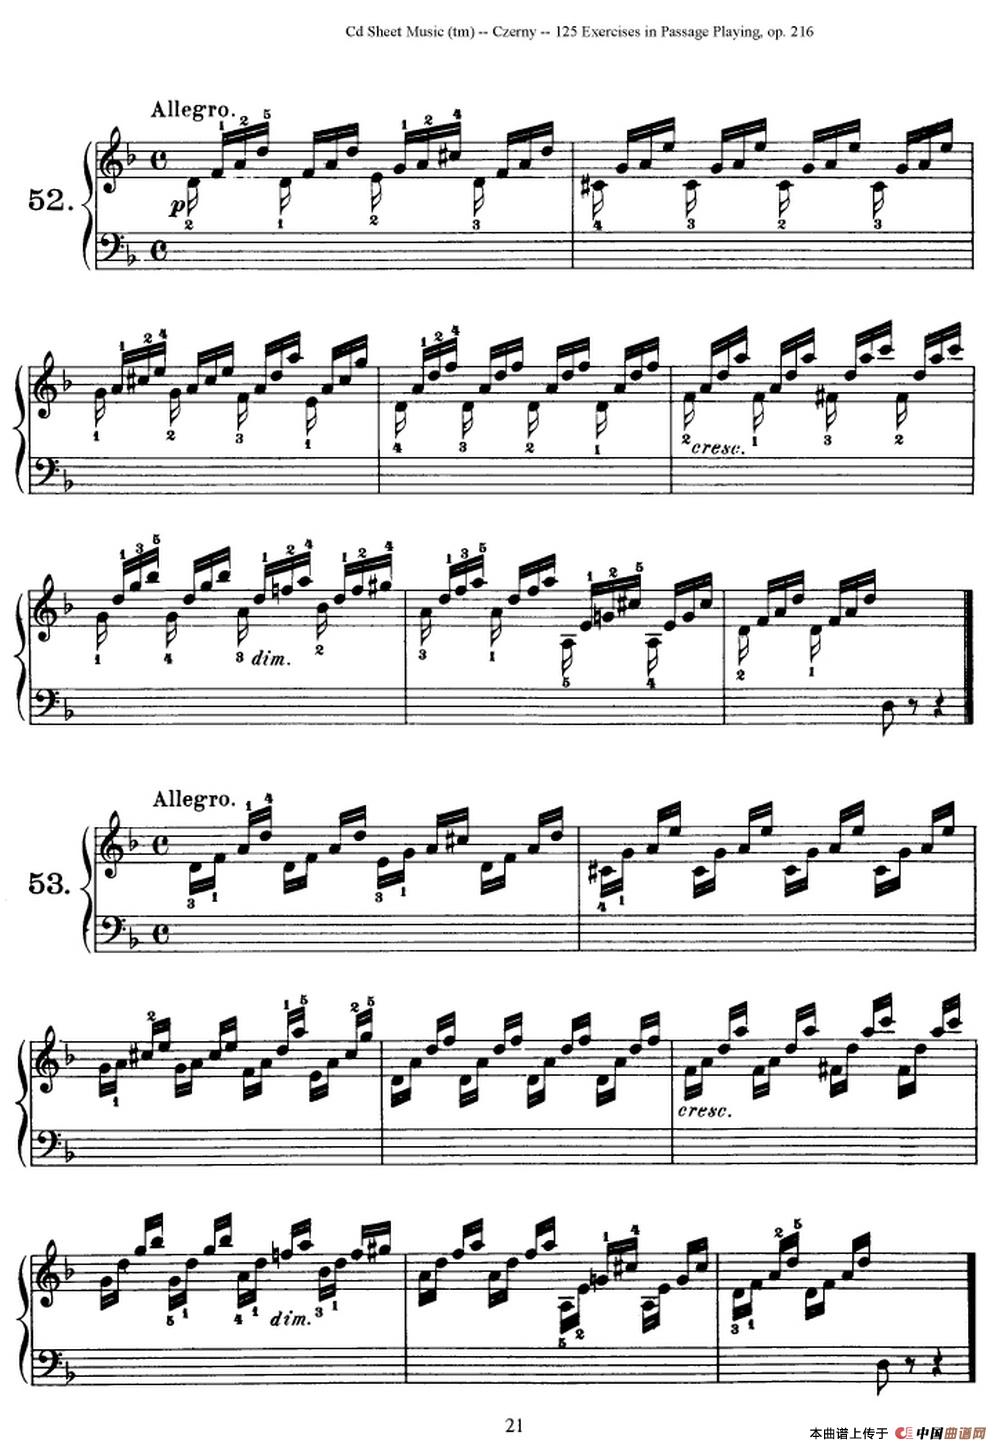 125 Exercises in Passage Playing Op.261（车尔尼125首钢琴